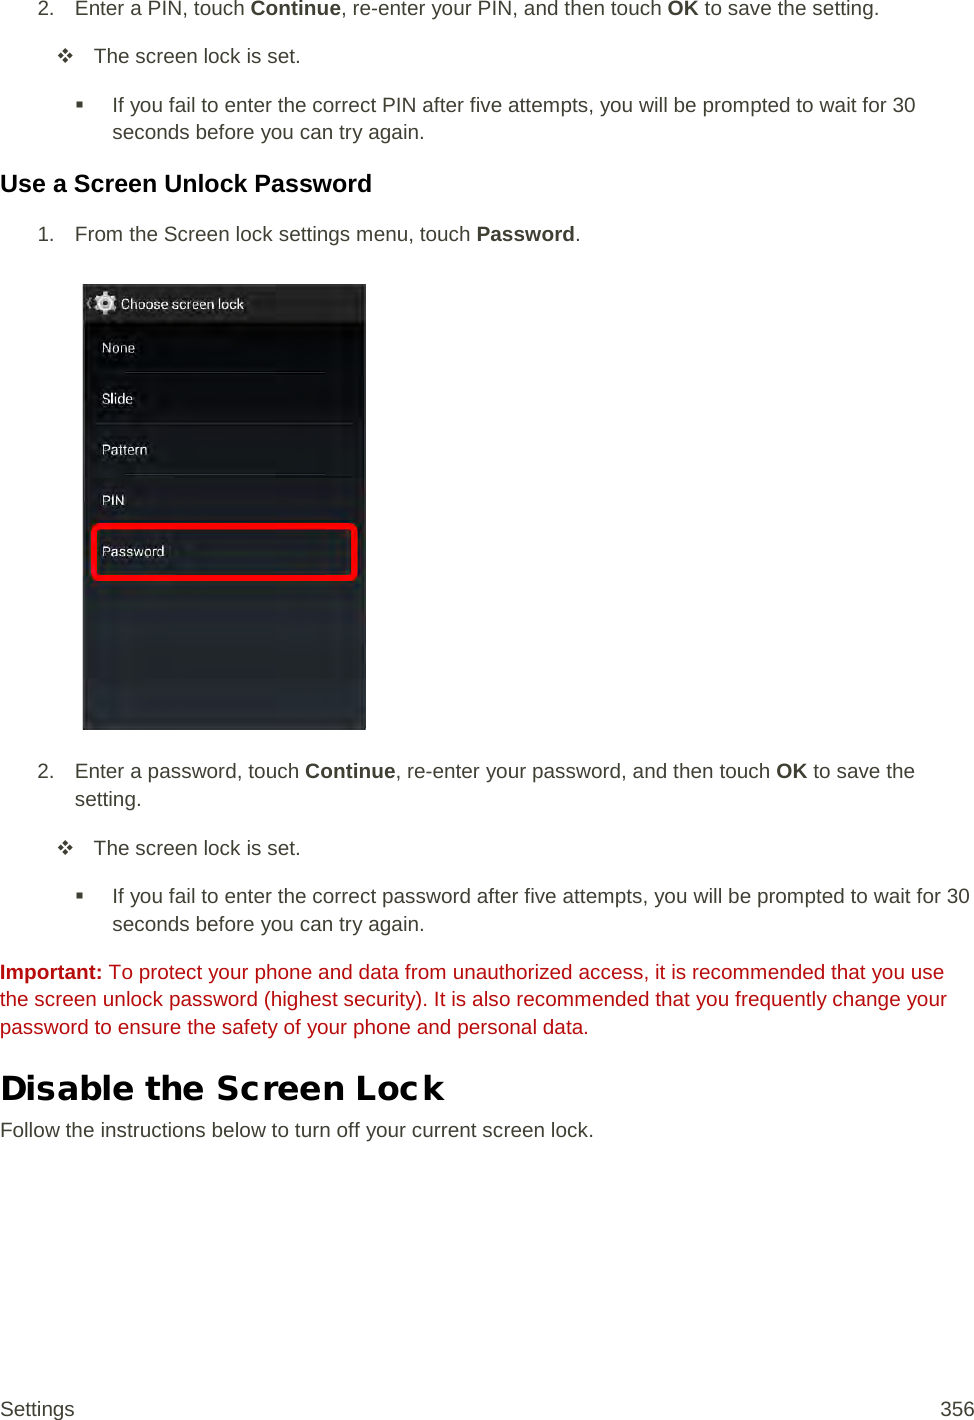 2. Enter a PIN, touch Continue, re-enter your PIN, and then touch OK to save the setting.  The screen lock is set.  If you fail to enter the correct PIN after five attempts, you will be prompted to wait for 30 seconds before you can try again. Use a Screen Unlock Password 1.  From the Screen lock settings menu, touch Password.   2. Enter a password, touch Continue, re-enter your password, and then touch OK to save the setting.  The screen lock is set.  If you fail to enter the correct password after five attempts, you will be prompted to wait for 30 seconds before you can try again. Important: To protect your phone and data from unauthorized access, it is recommended that you use the screen unlock password (highest security). It is also recommended that you frequently change your password to ensure the safety of your phone and personal data. Disable the Screen Lock Follow the instructions below to turn off your current screen lock. Settings 356 